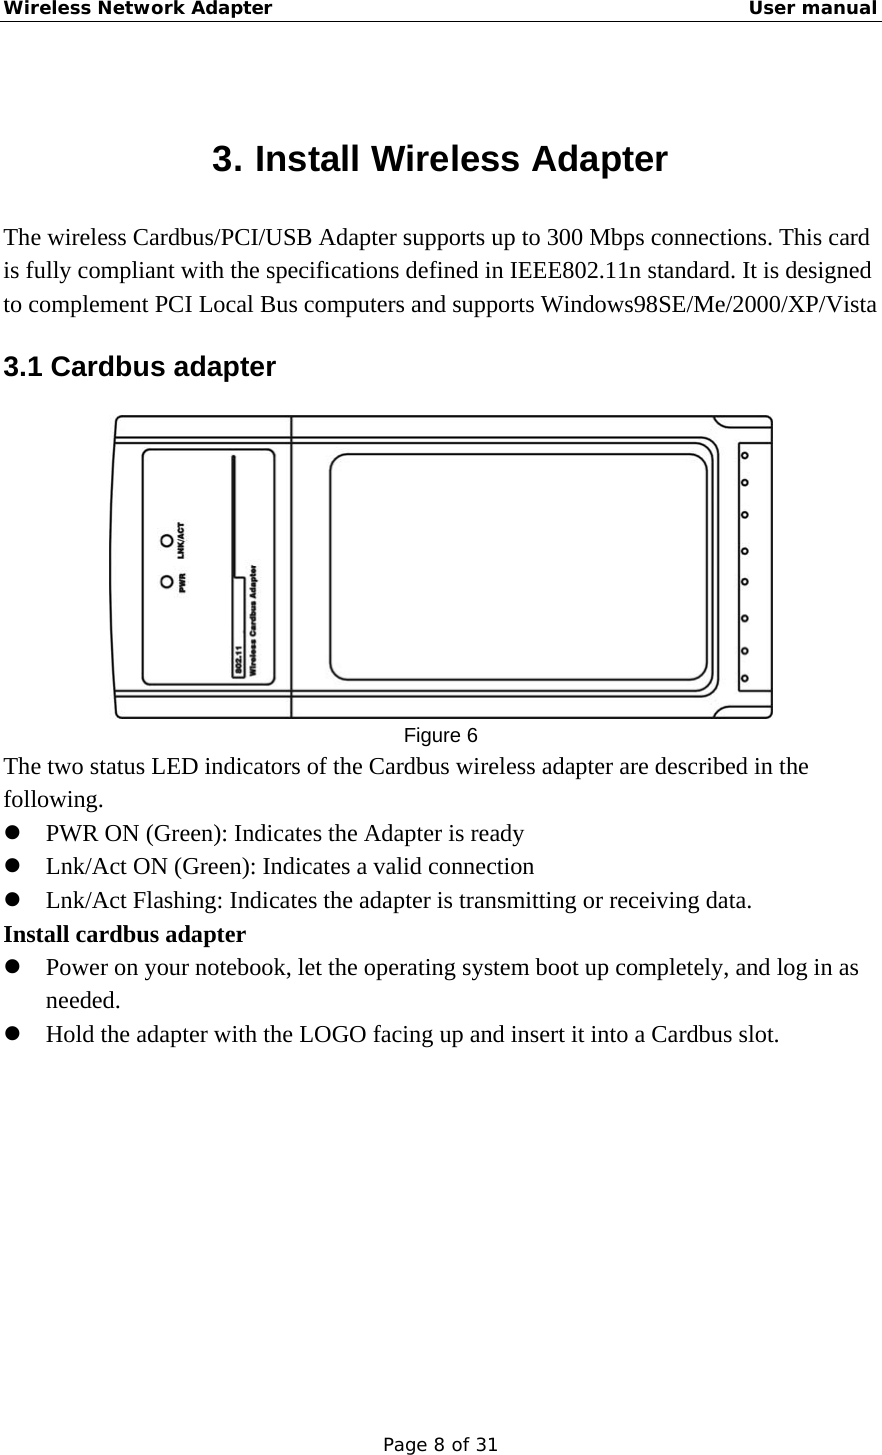 Wireless Network Adapter                                                    User manual Page 8 of 31  3. Install Wireless Adapter The wireless Cardbus/PCI/USB Adapter supports up to 300 Mbps connections. This card is fully compliant with the specifications defined in IEEE802.11n standard. It is designed to complement PCI Local Bus computers and supports Windows98SE/Me/2000/XP/Vista 3.1 Cardbus adapter  Figure 6 The two status LED indicators of the Cardbus wireless adapter are described in the following. z PWR ON (Green): Indicates the Adapter is ready z Lnk/Act ON (Green): Indicates a valid connection   z Lnk/Act Flashing: Indicates the adapter is transmitting or receiving data. Install cardbus adapter z Power on your notebook, let the operating system boot up completely, and log in as needed. z Hold the adapter with the LOGO facing up and insert it into a Cardbus slot.   